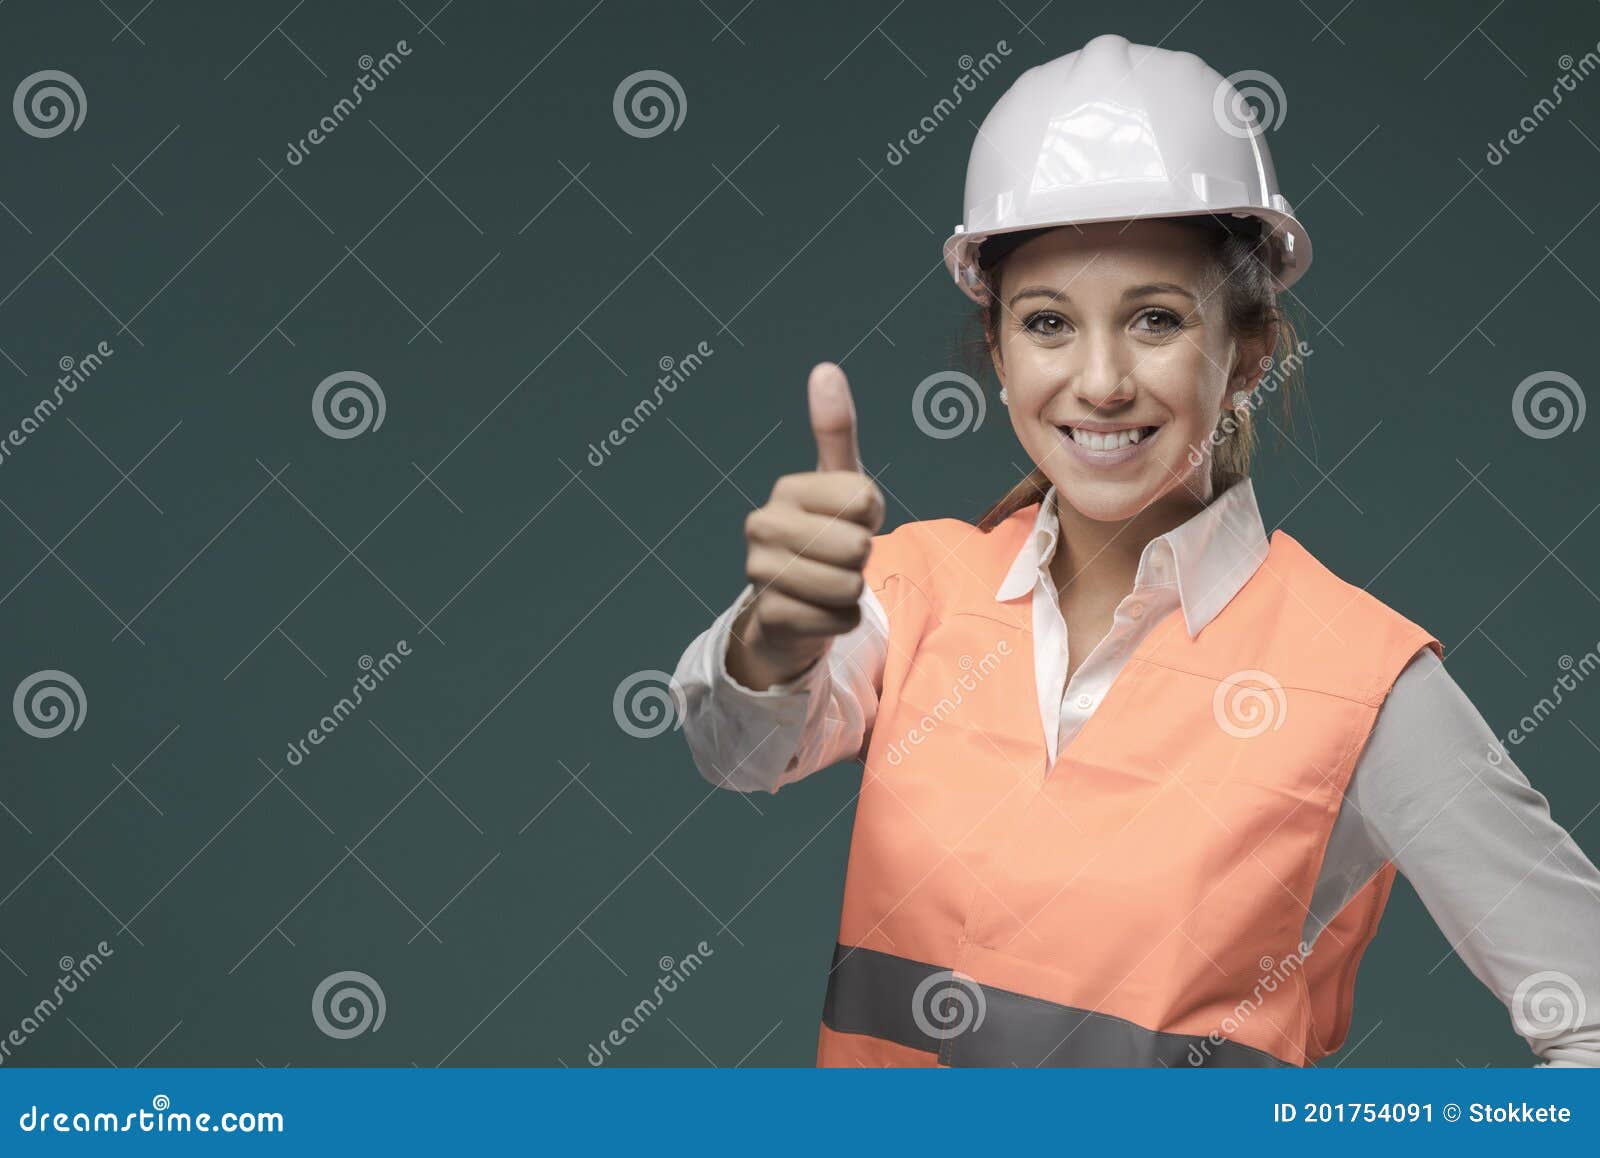 woman wearing protective workwear and safety helmet